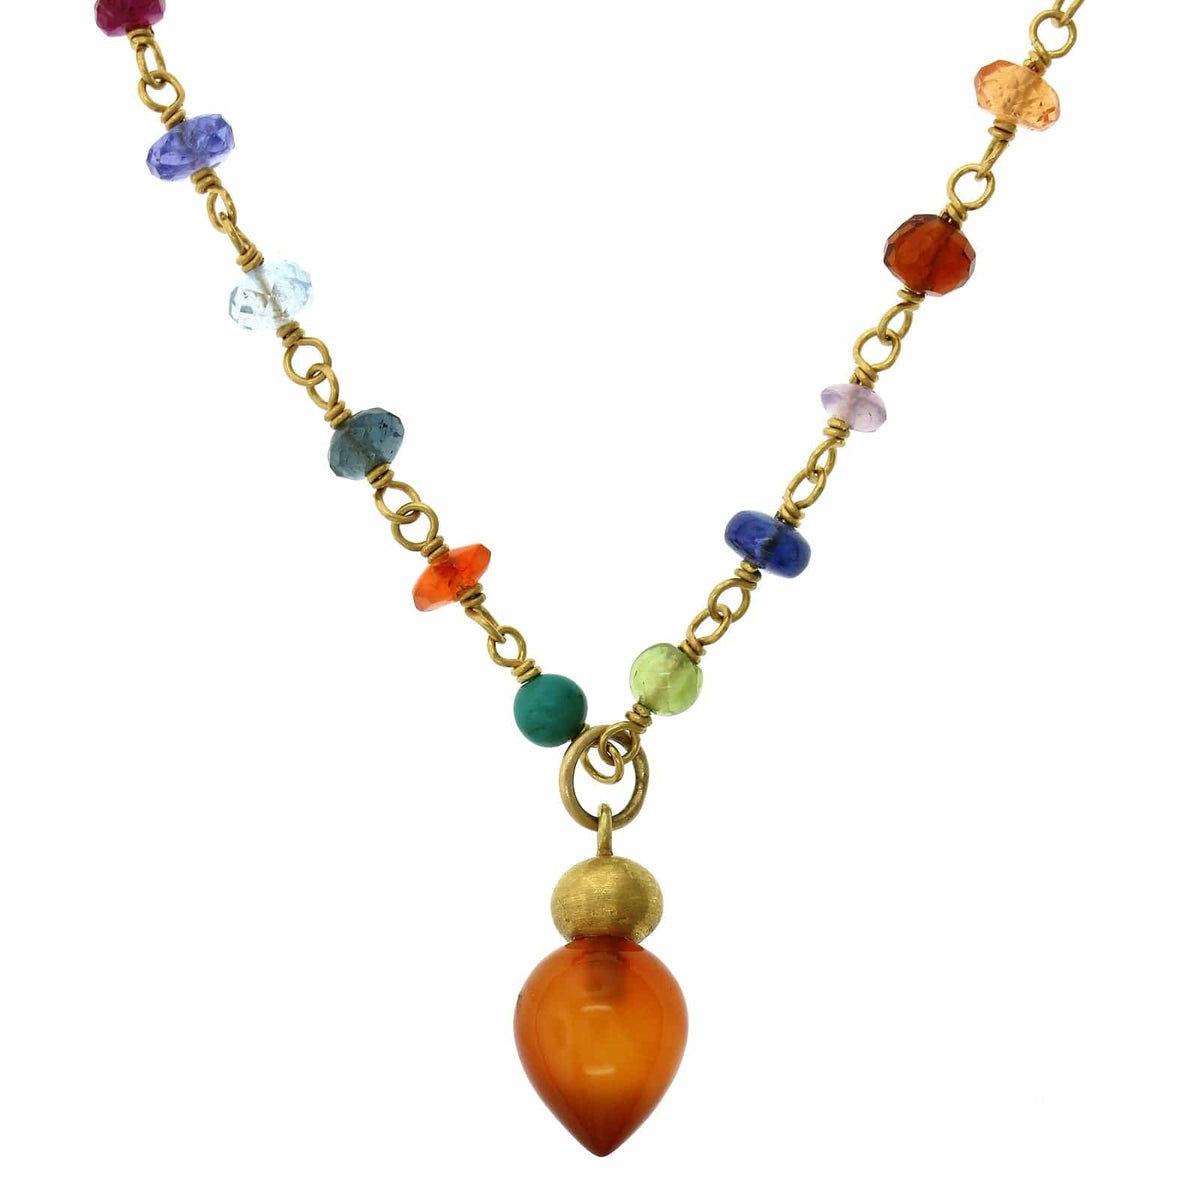 22K Yellow Gold Multi Gem Buoy Necklace, 22k yellow gold Long's Jewelers